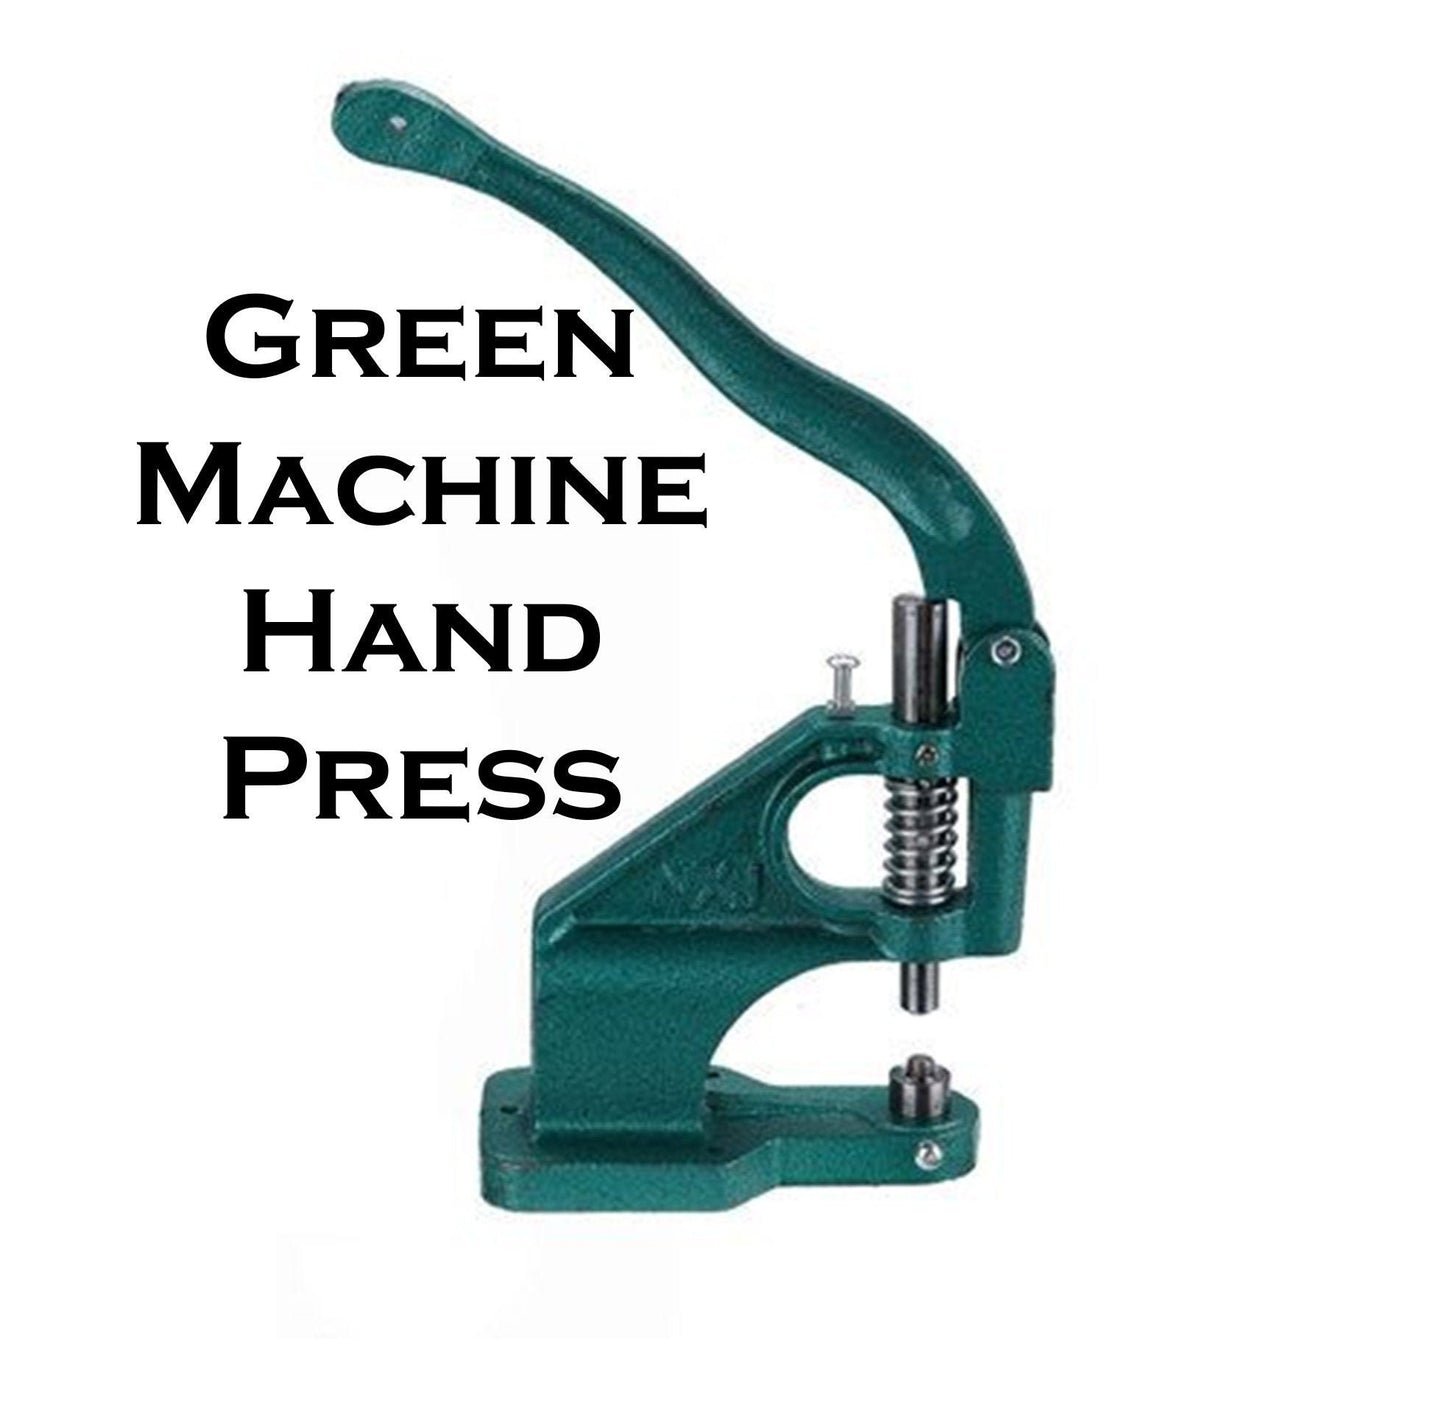 Hand Press for Setting Rivets, Grommets, and Snaps - Dies Sold Separately